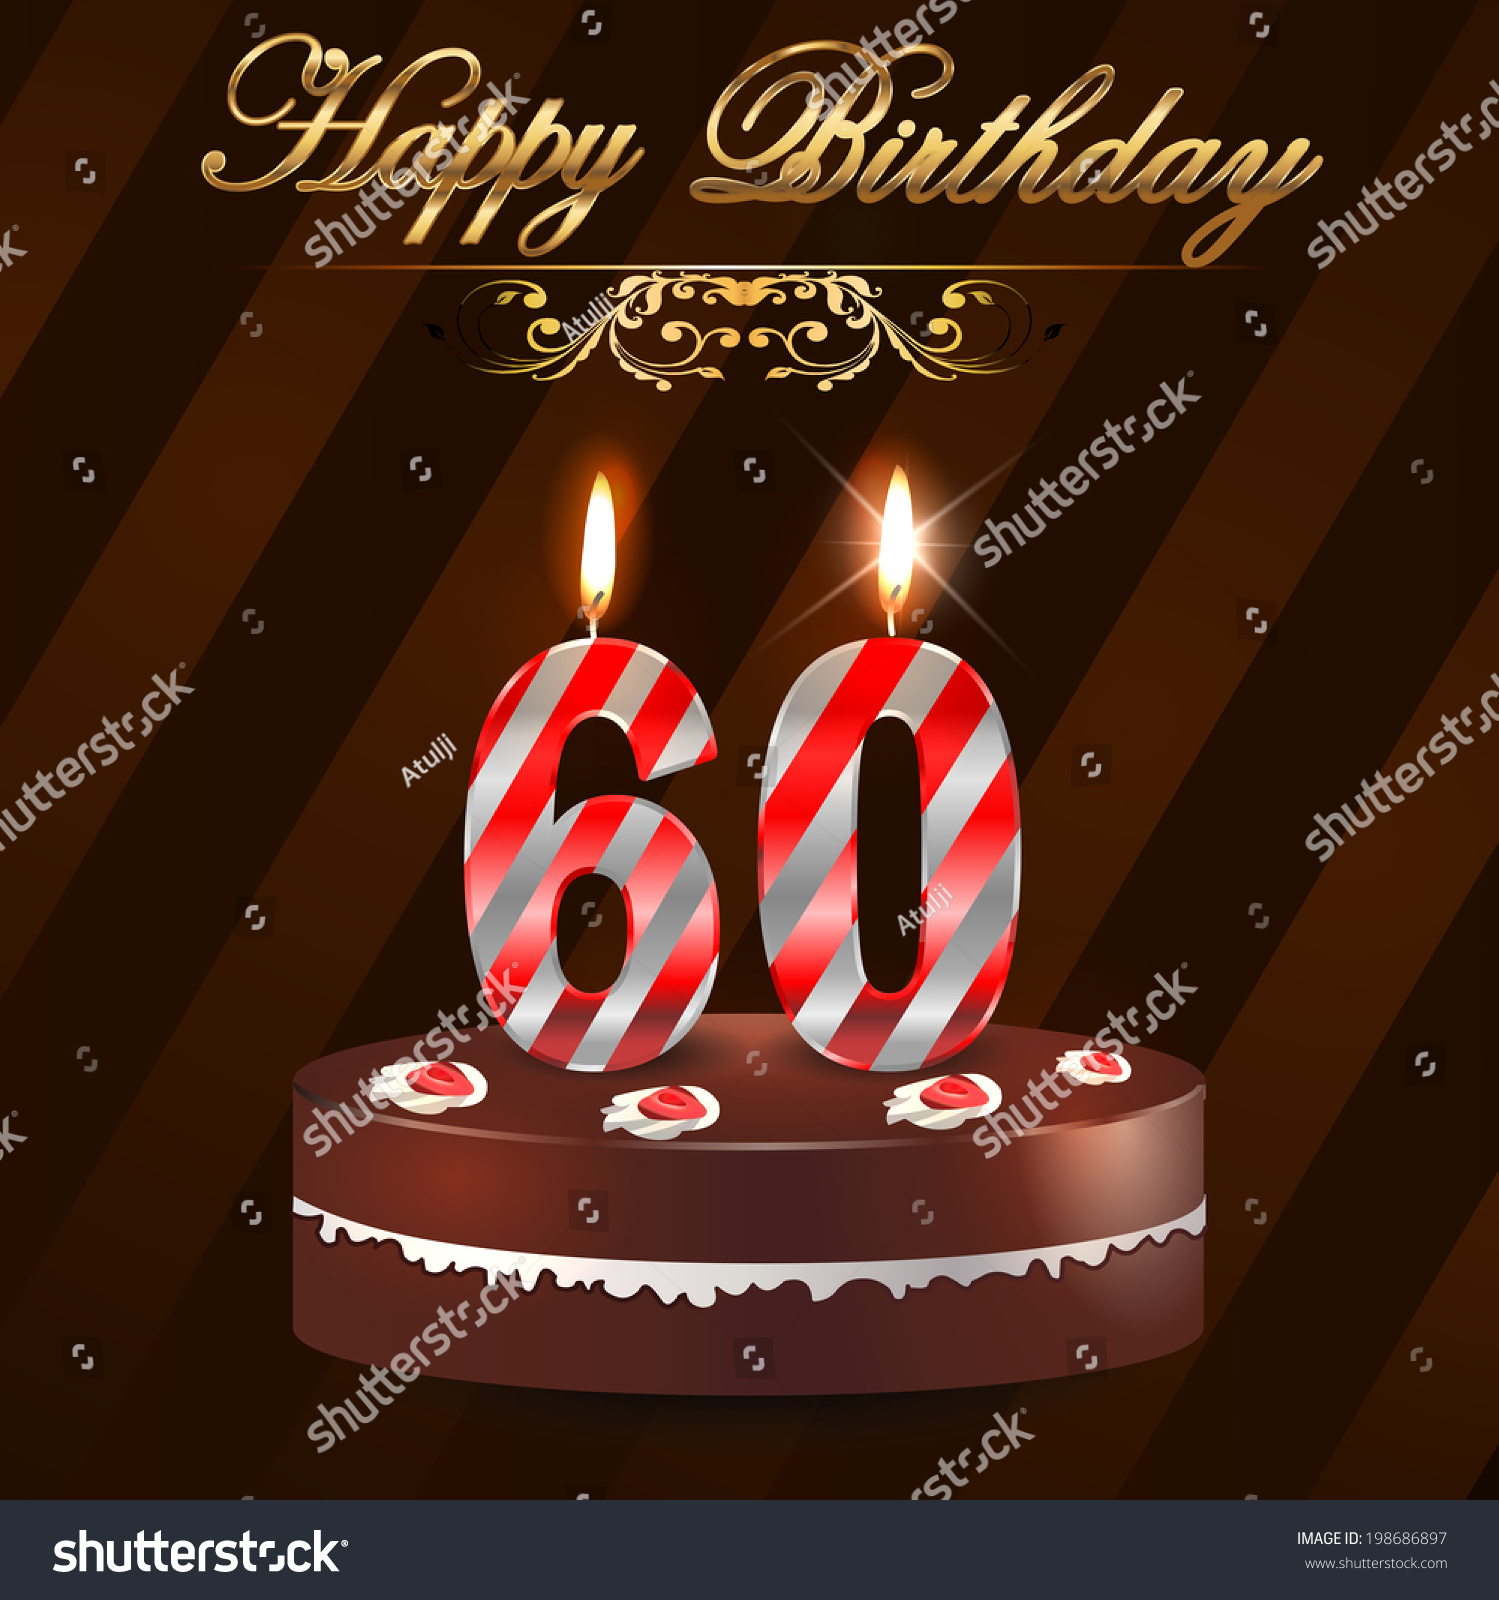 SVG of 60 year Happy Birthday Card with cake and candles, 60th birthday - vector EPS10 svg